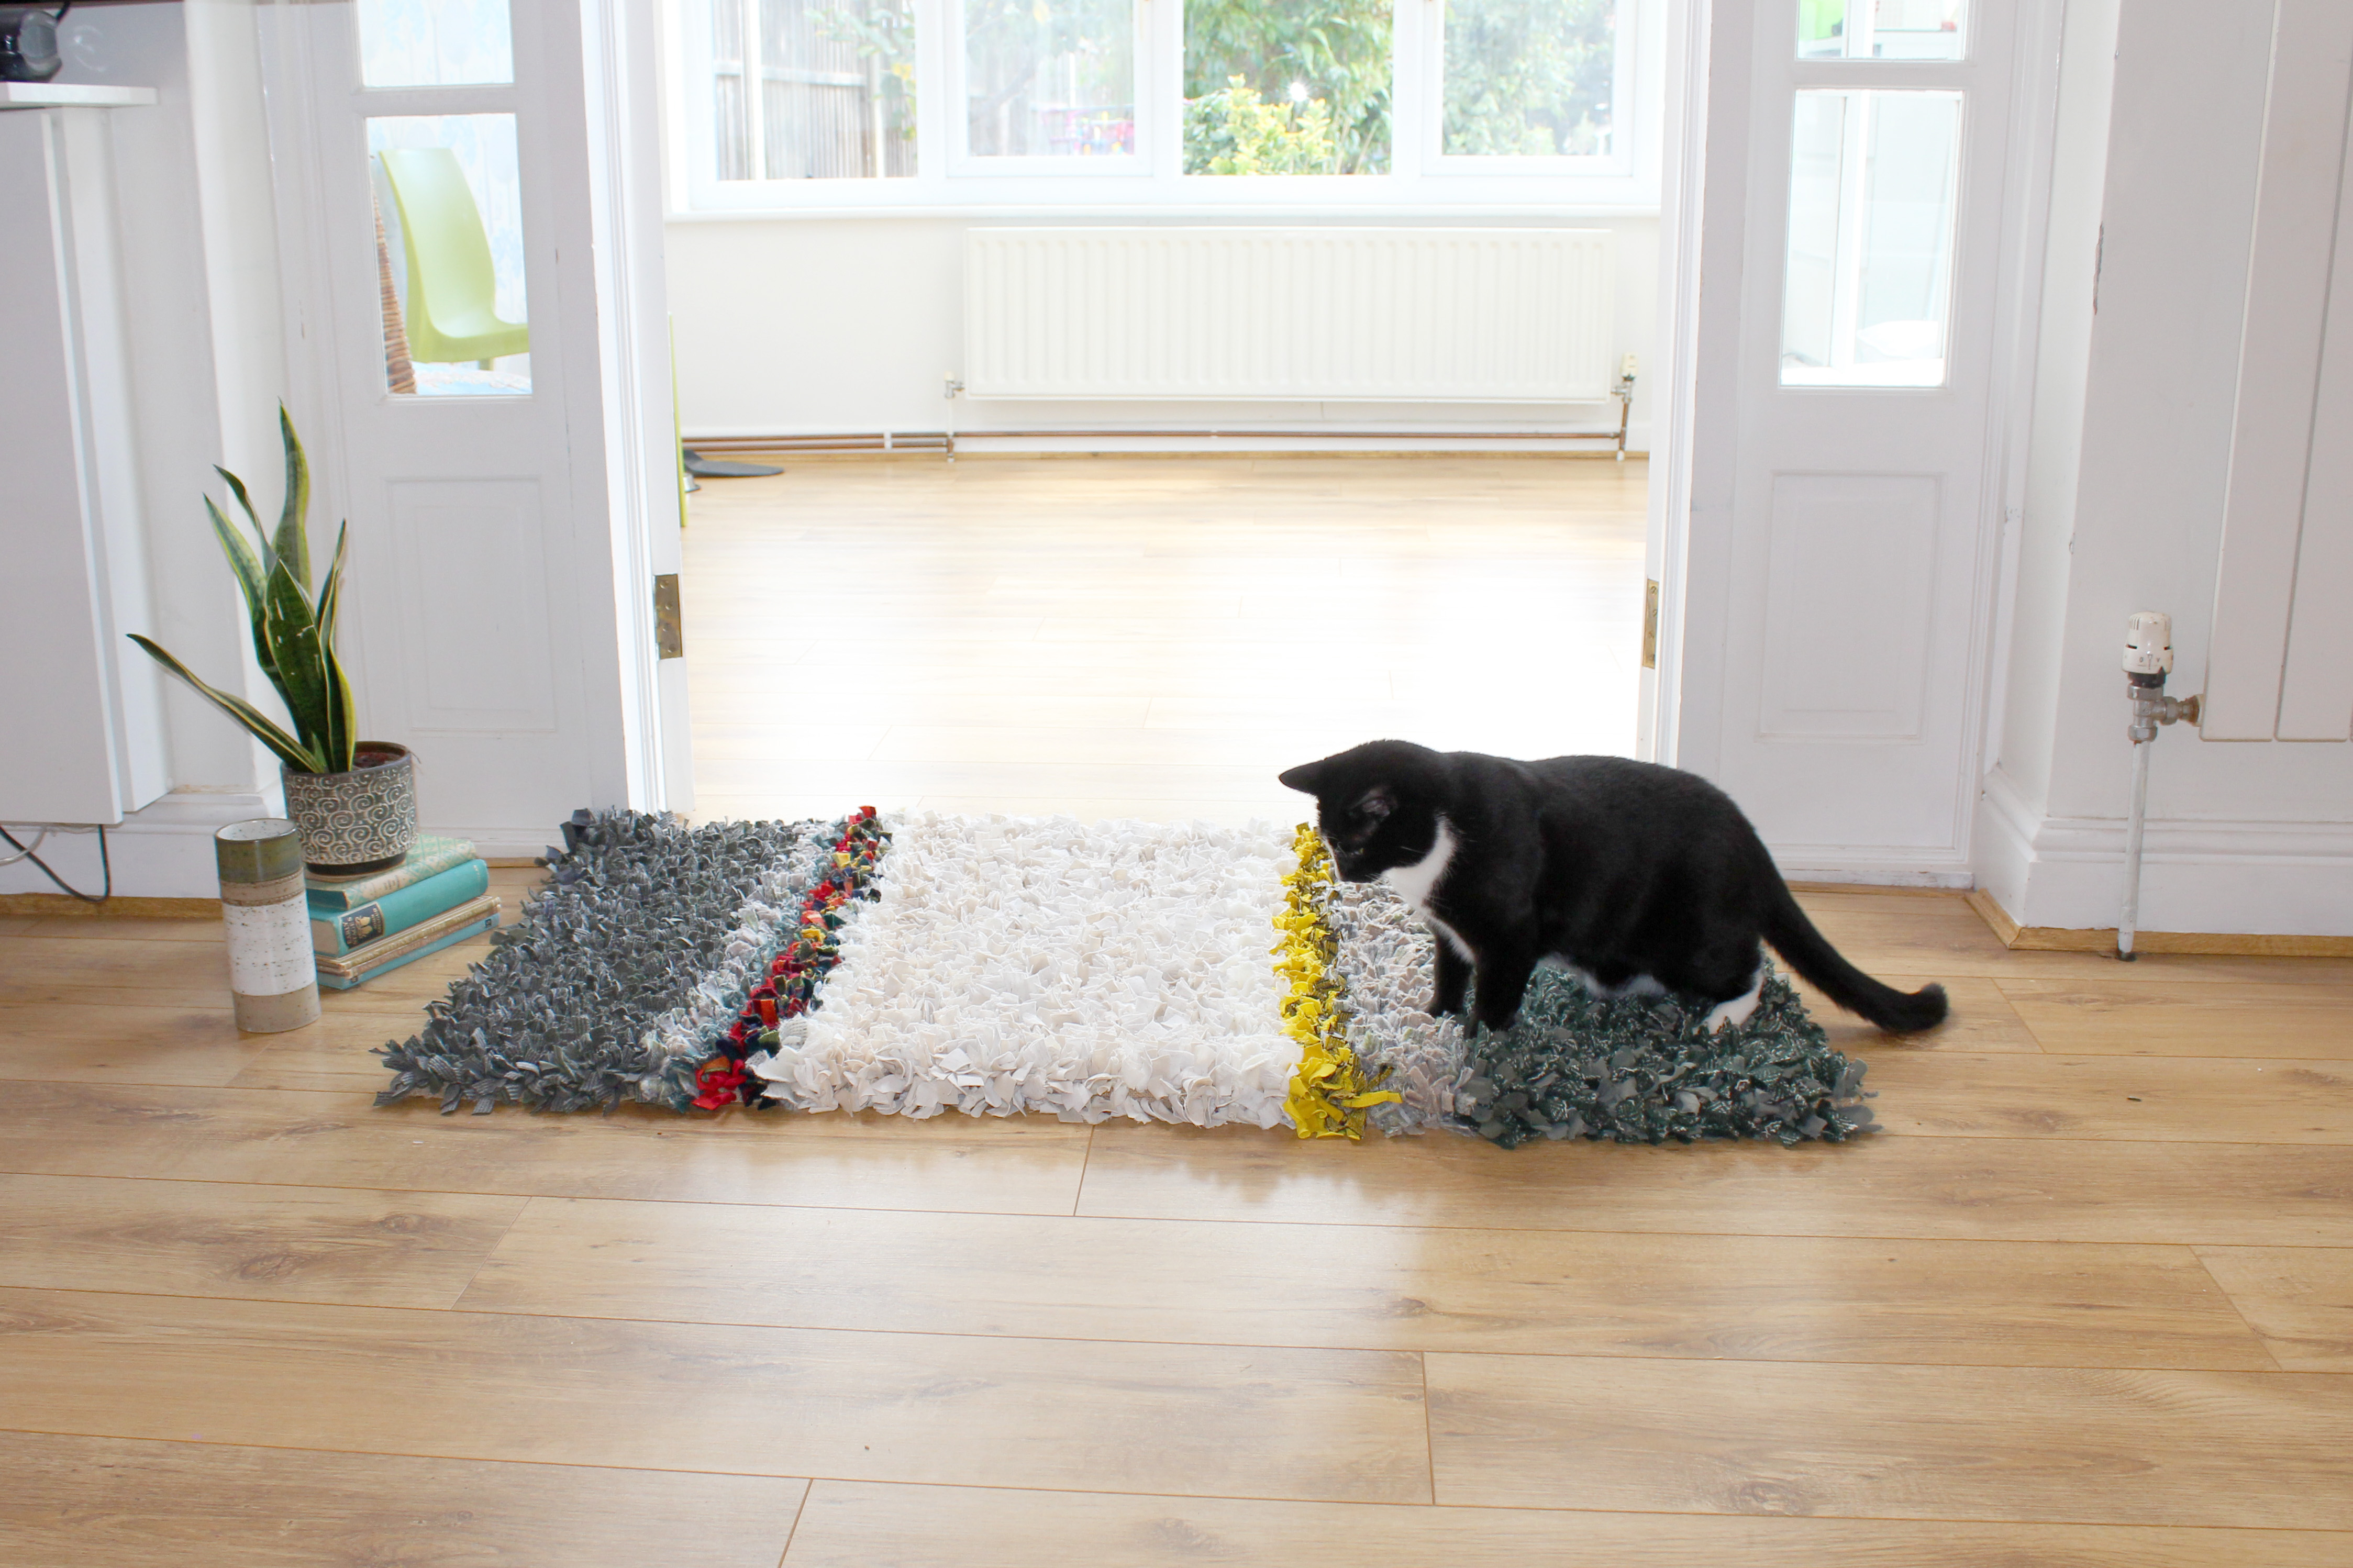 Striped handmade rag rug with cat sitting on it